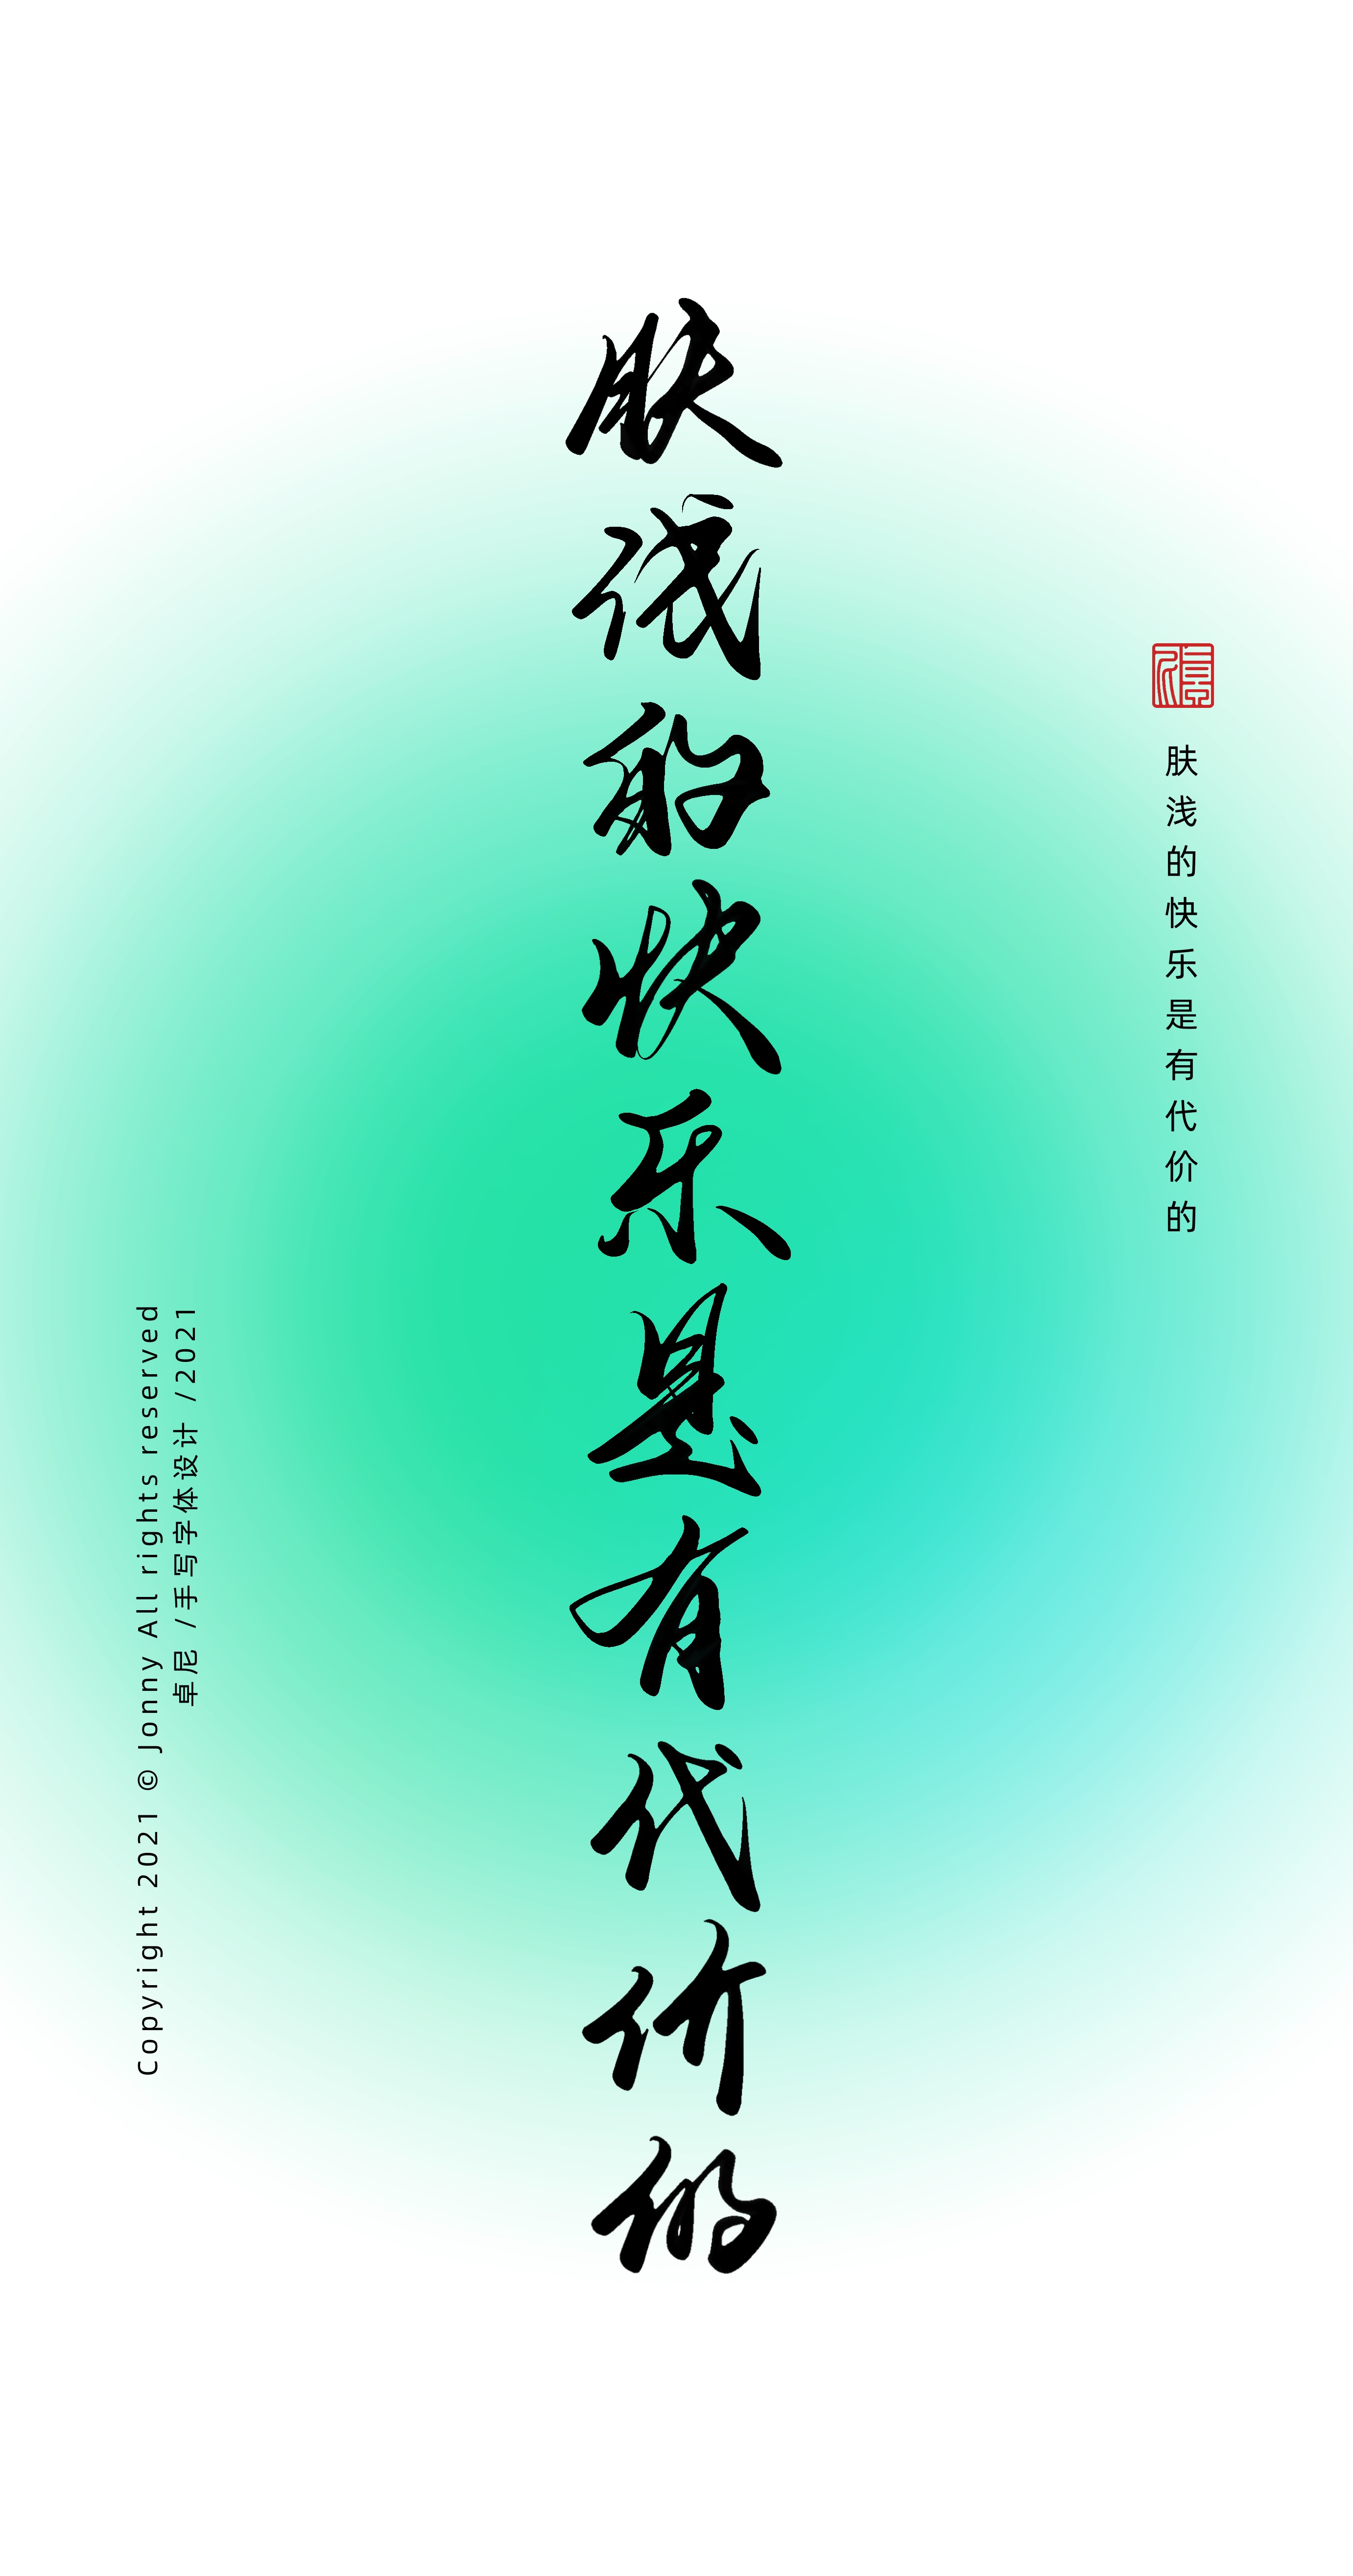 16P Collection of the latest Chinese font design schemes in 2021 #.573